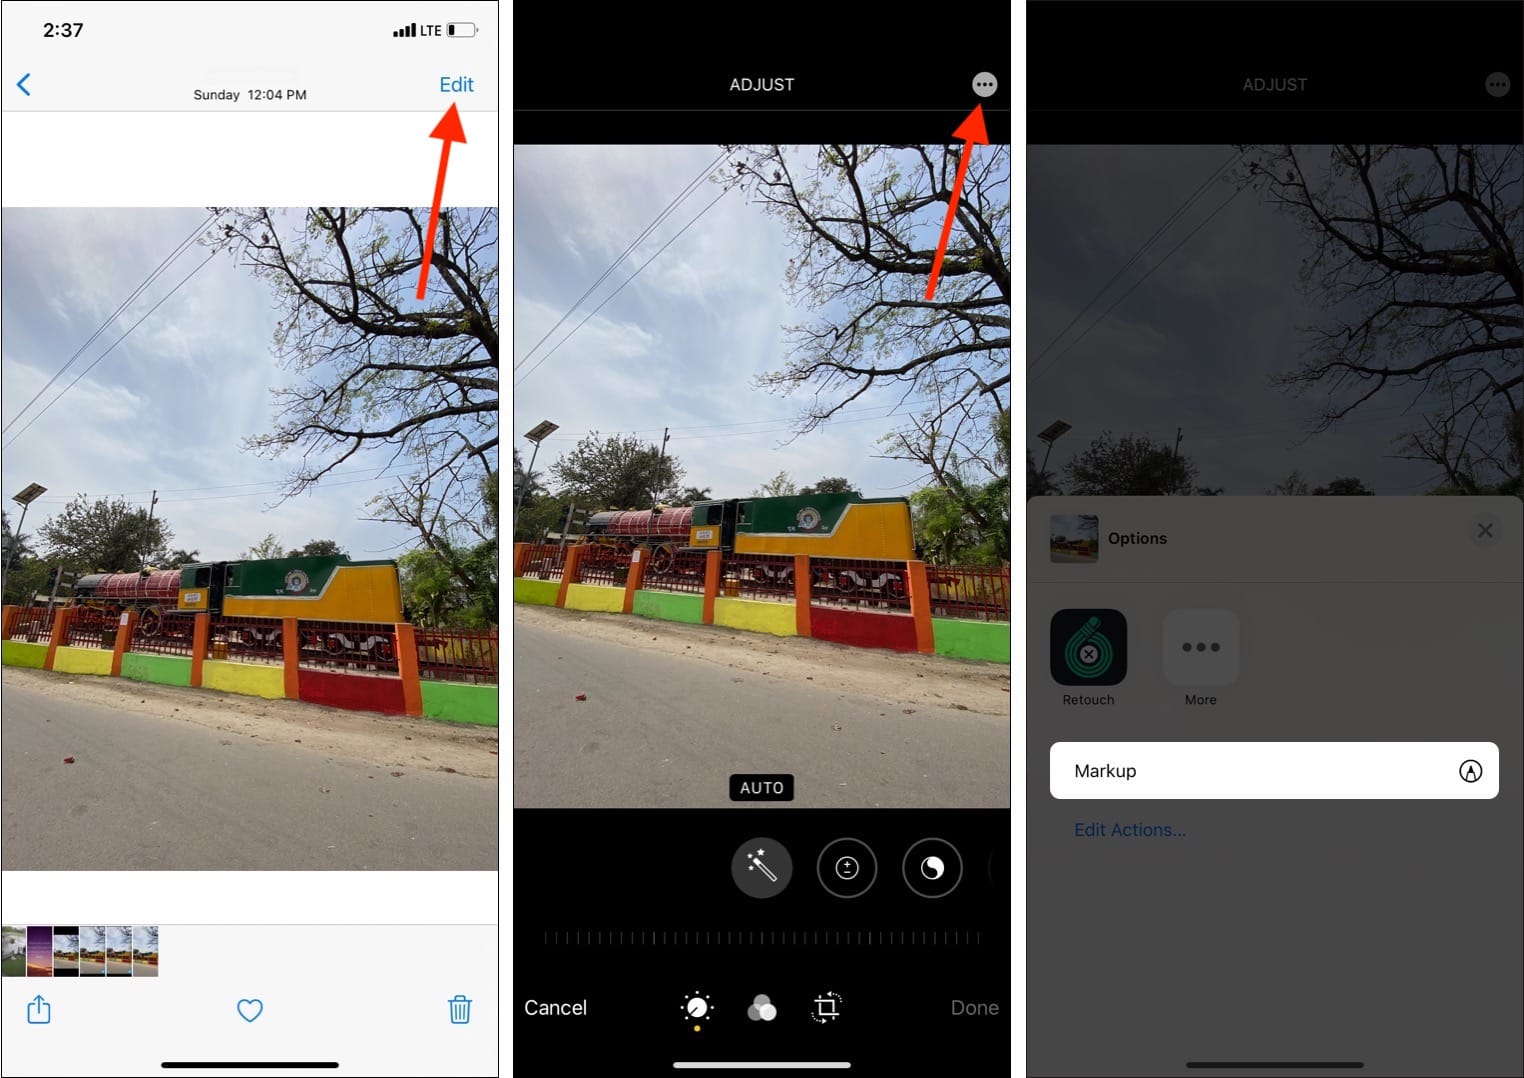 Open an image tap Edit then three dots icon and tap Markup